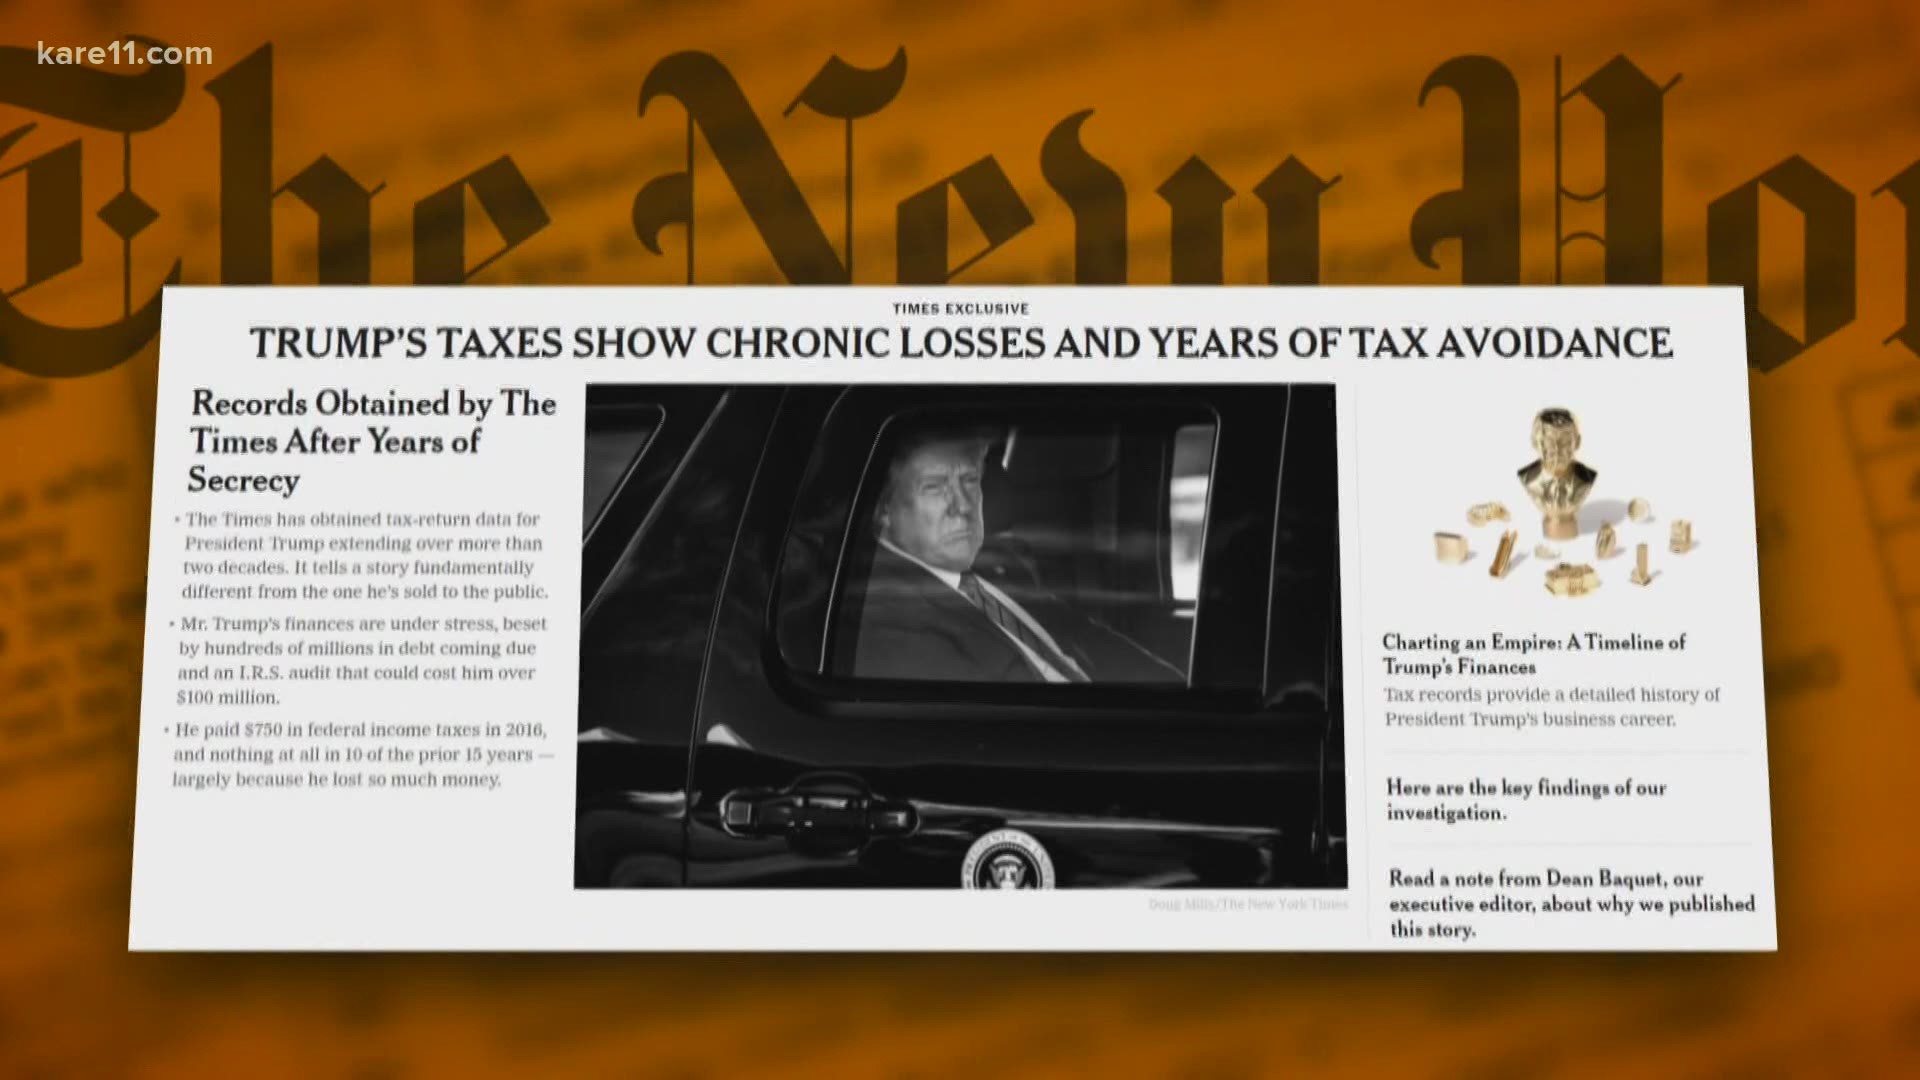 President Donald Trump paid no federal income taxes in 10 of the past 15 years, according to a report in The New York Times.